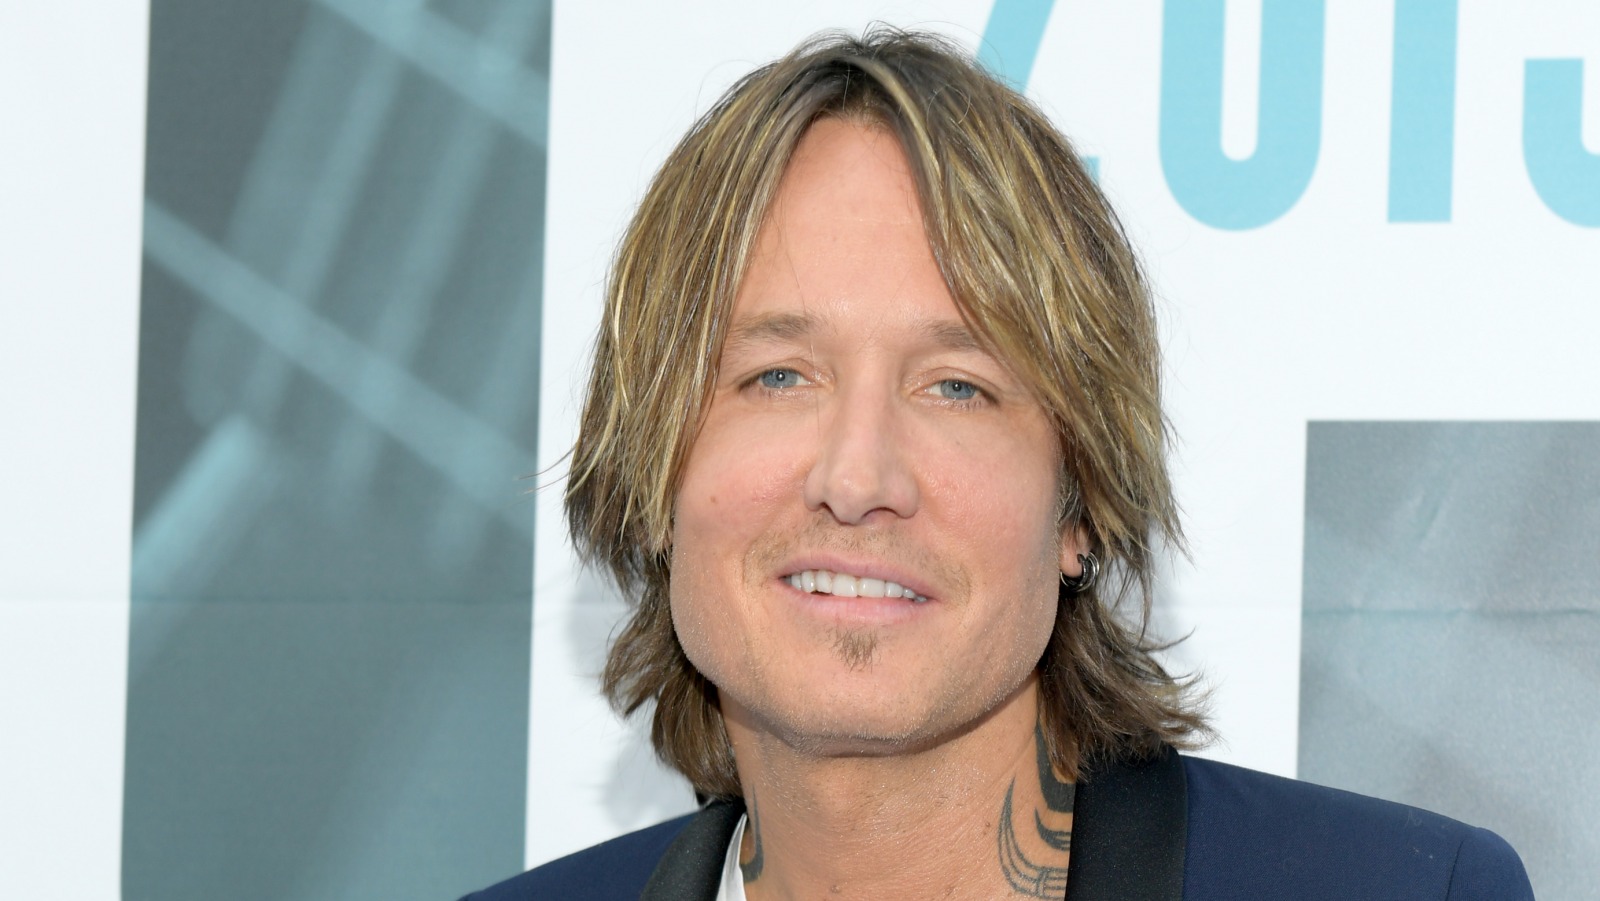 Details You Didn't Know About Keith Urban.